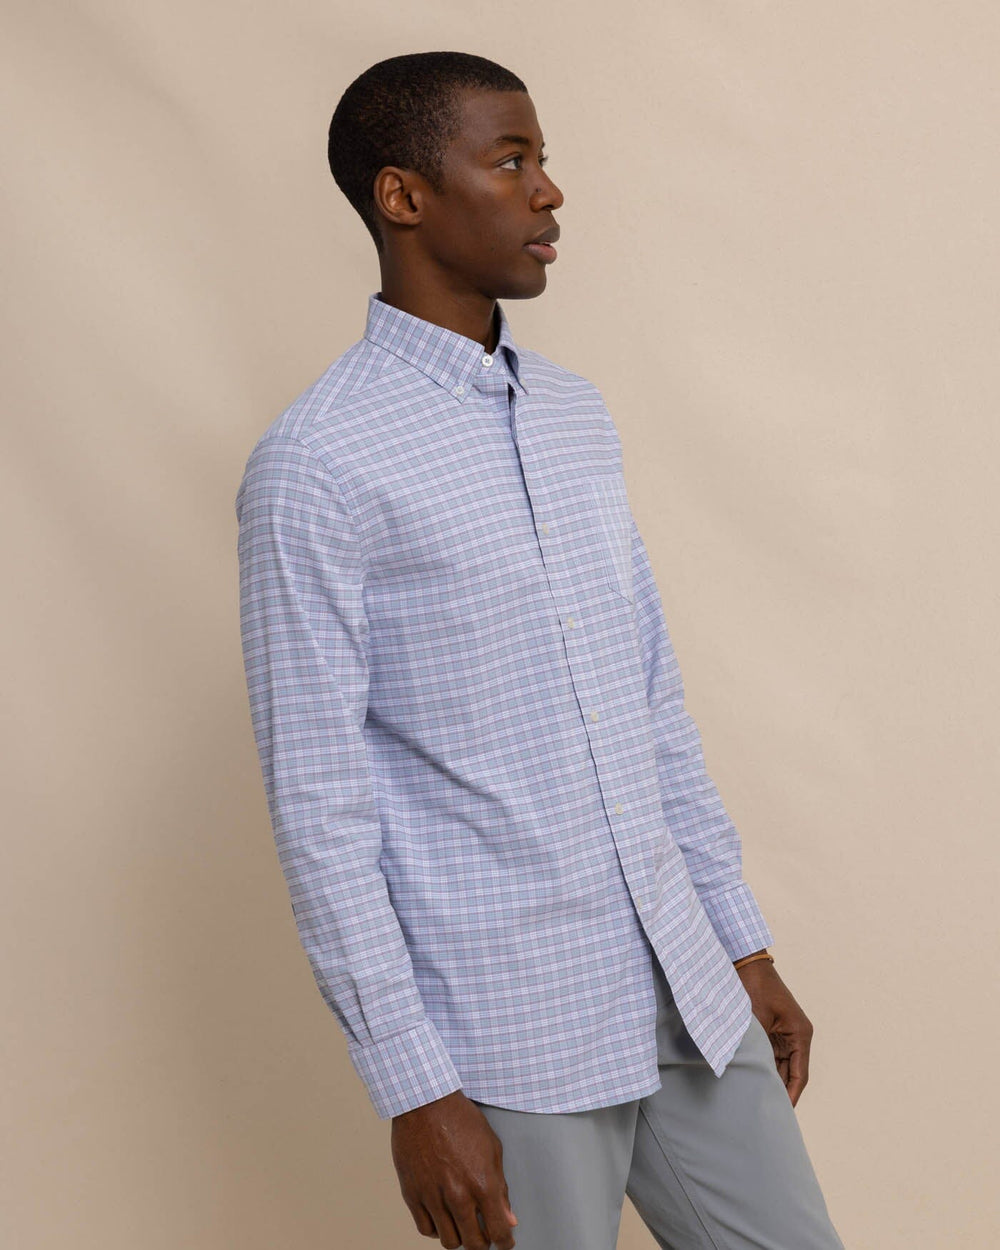 The front view of the Southern Tide Coastal Passage Trailside Plaid Long Sleeve SportShirt by Southern Tide - Subdued Blue